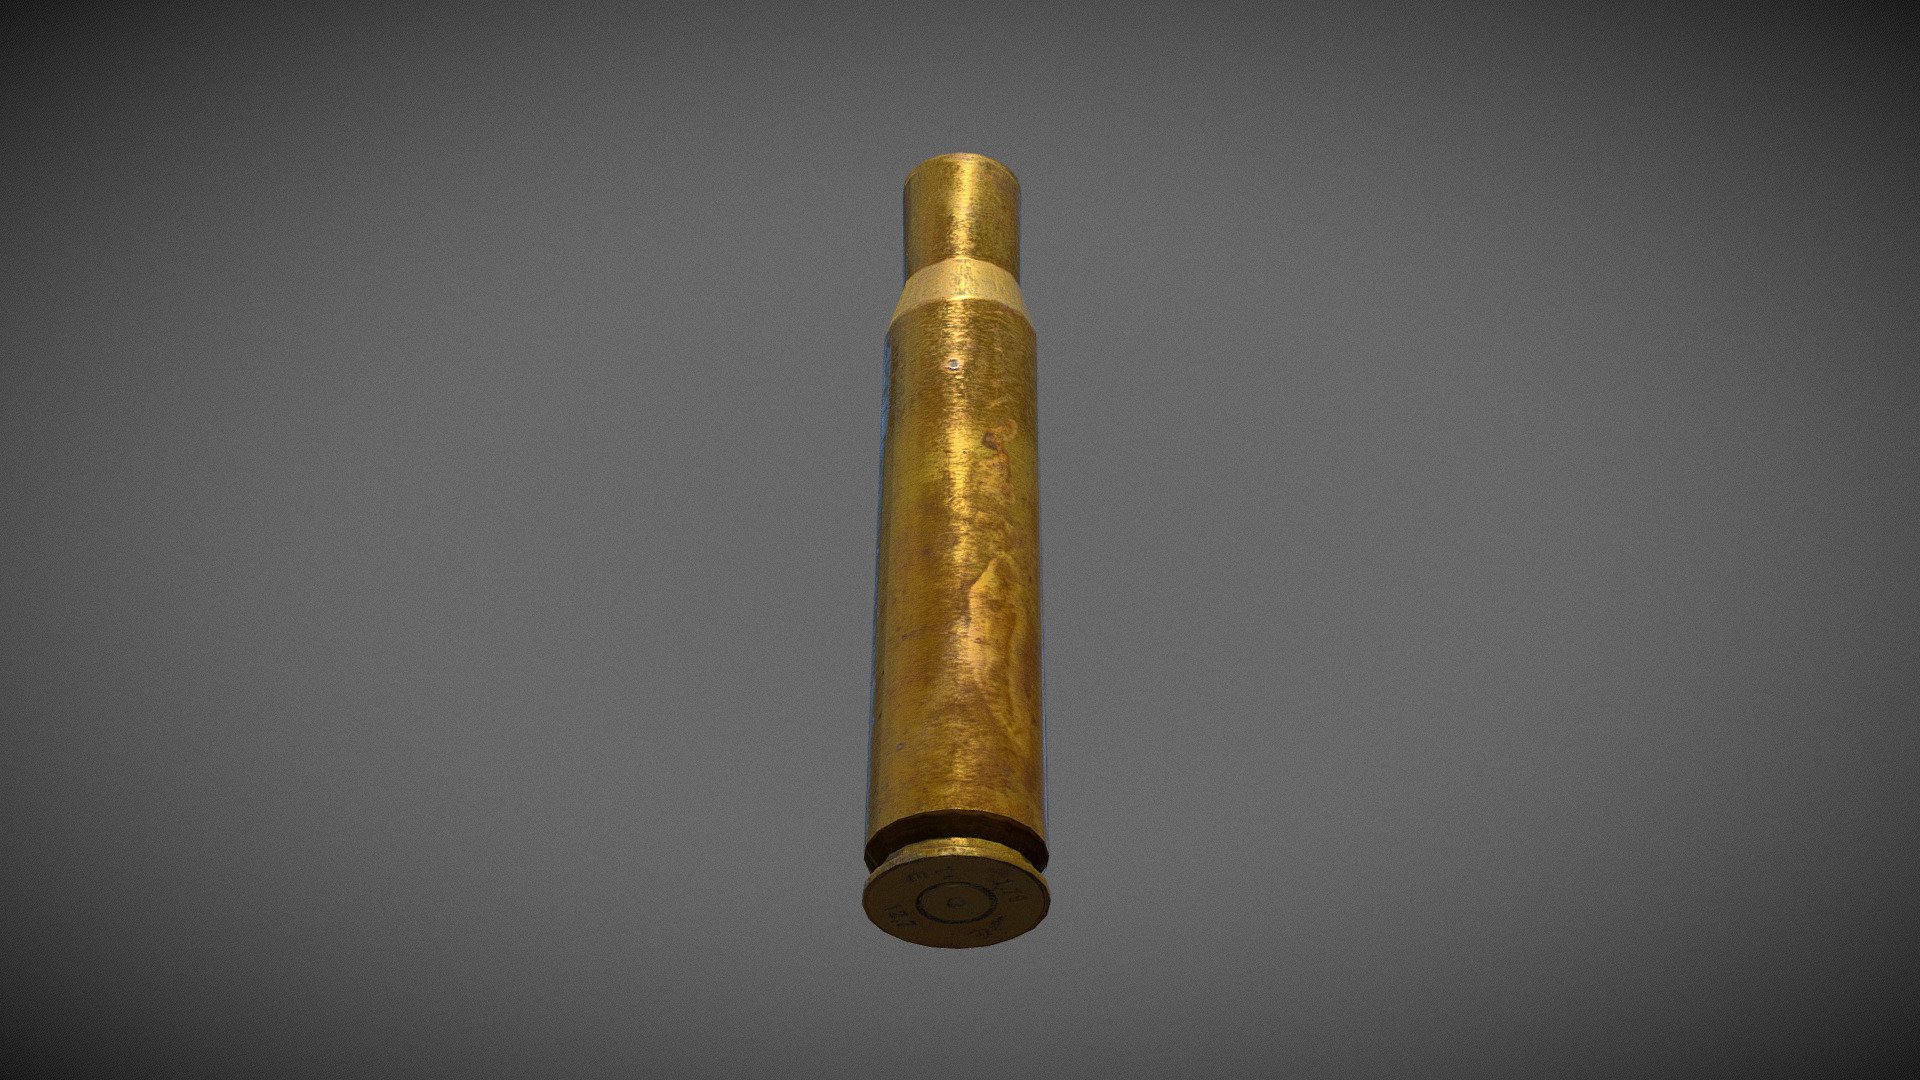 3D model of a bullet socket from a photogrammetry scan of 50 pic.
Gameready model only 500 poly with 4K PBR textures 3d model